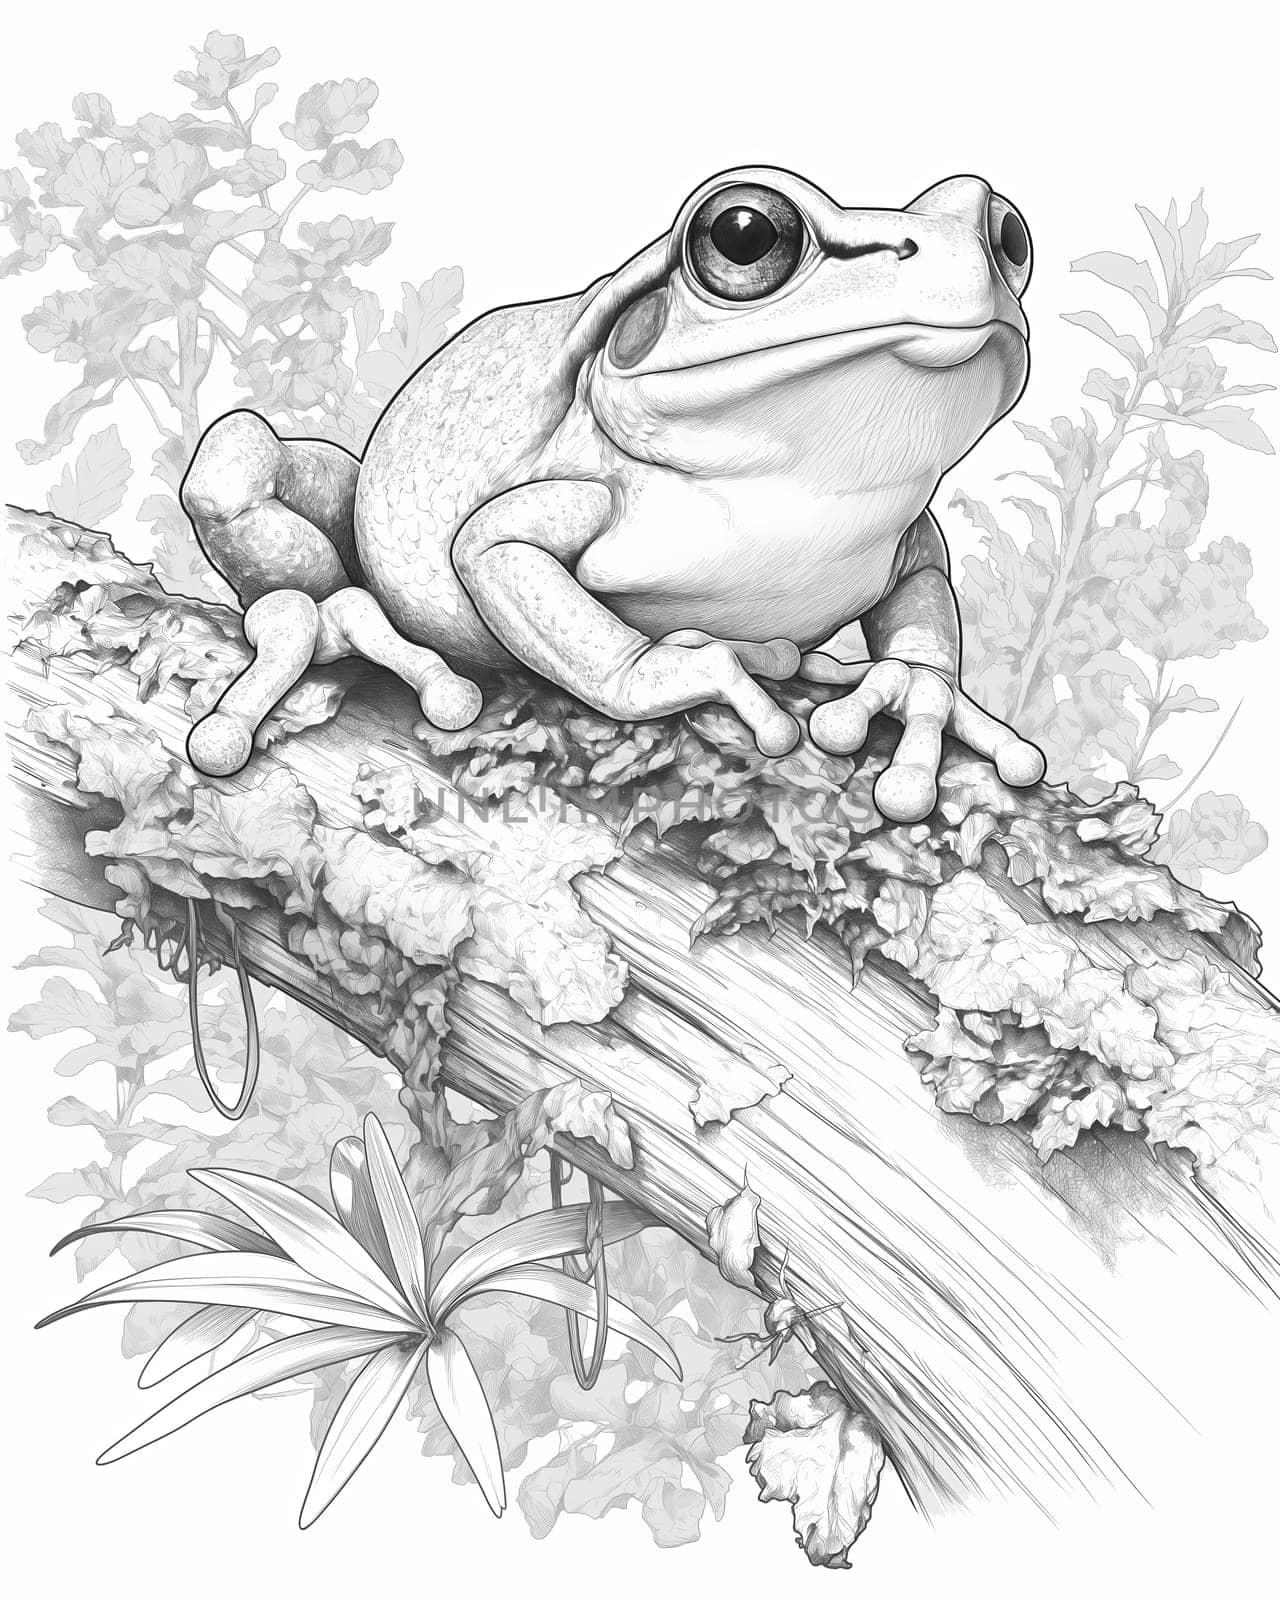 Coloring book for kids, animal coloring, frog. Selective focus